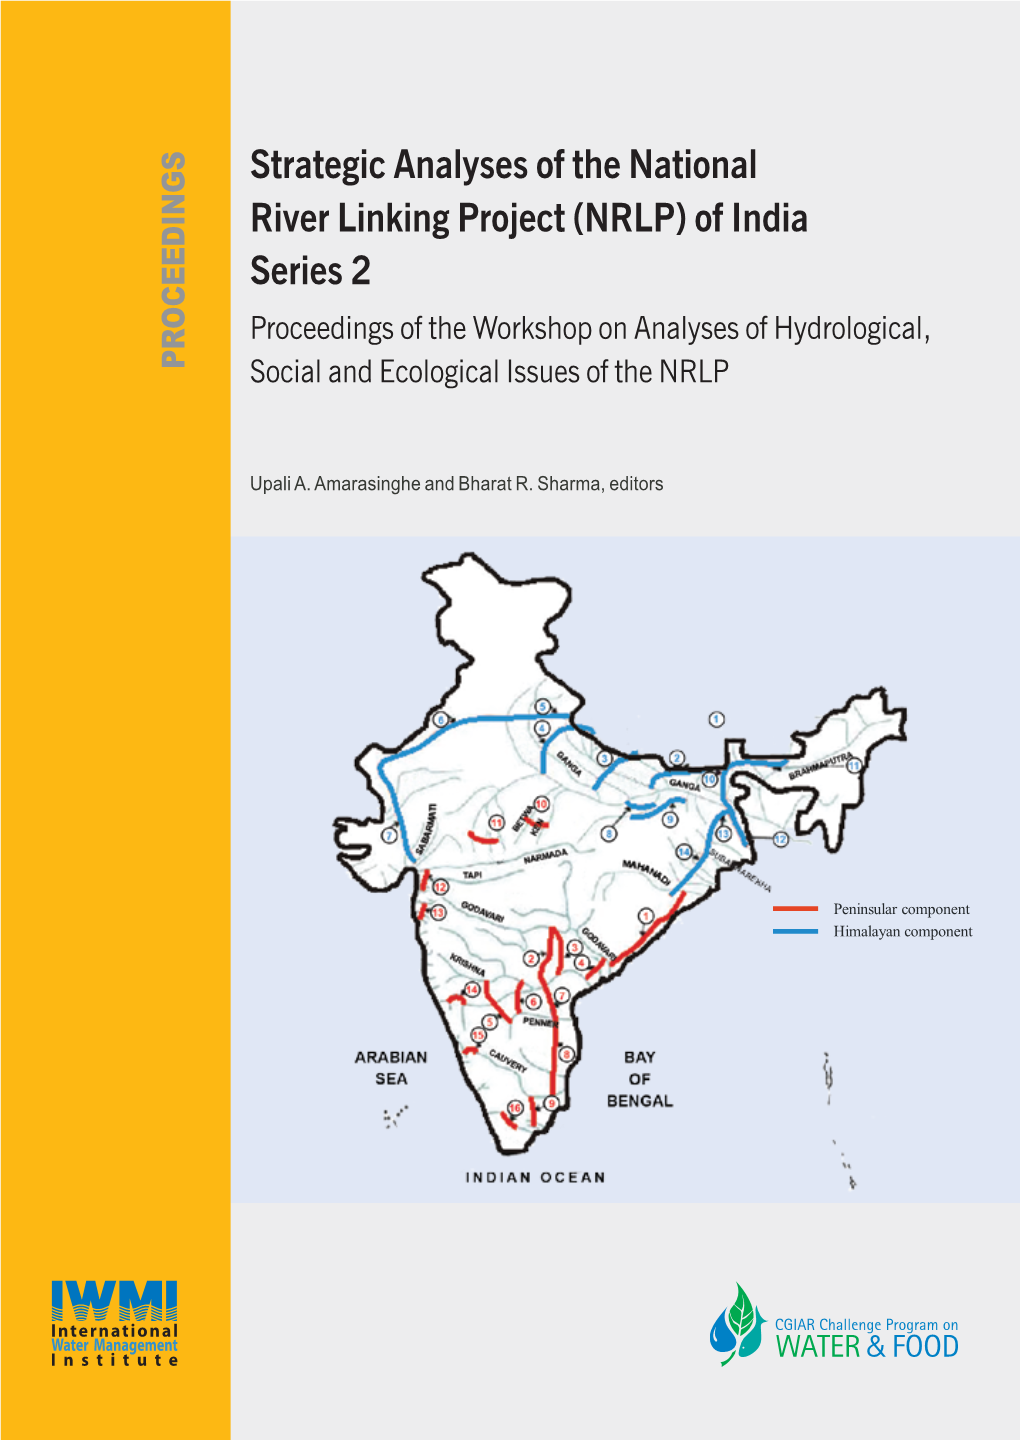 Strategic Analyses of the National River Linking Project (NRLP) of India Series 2